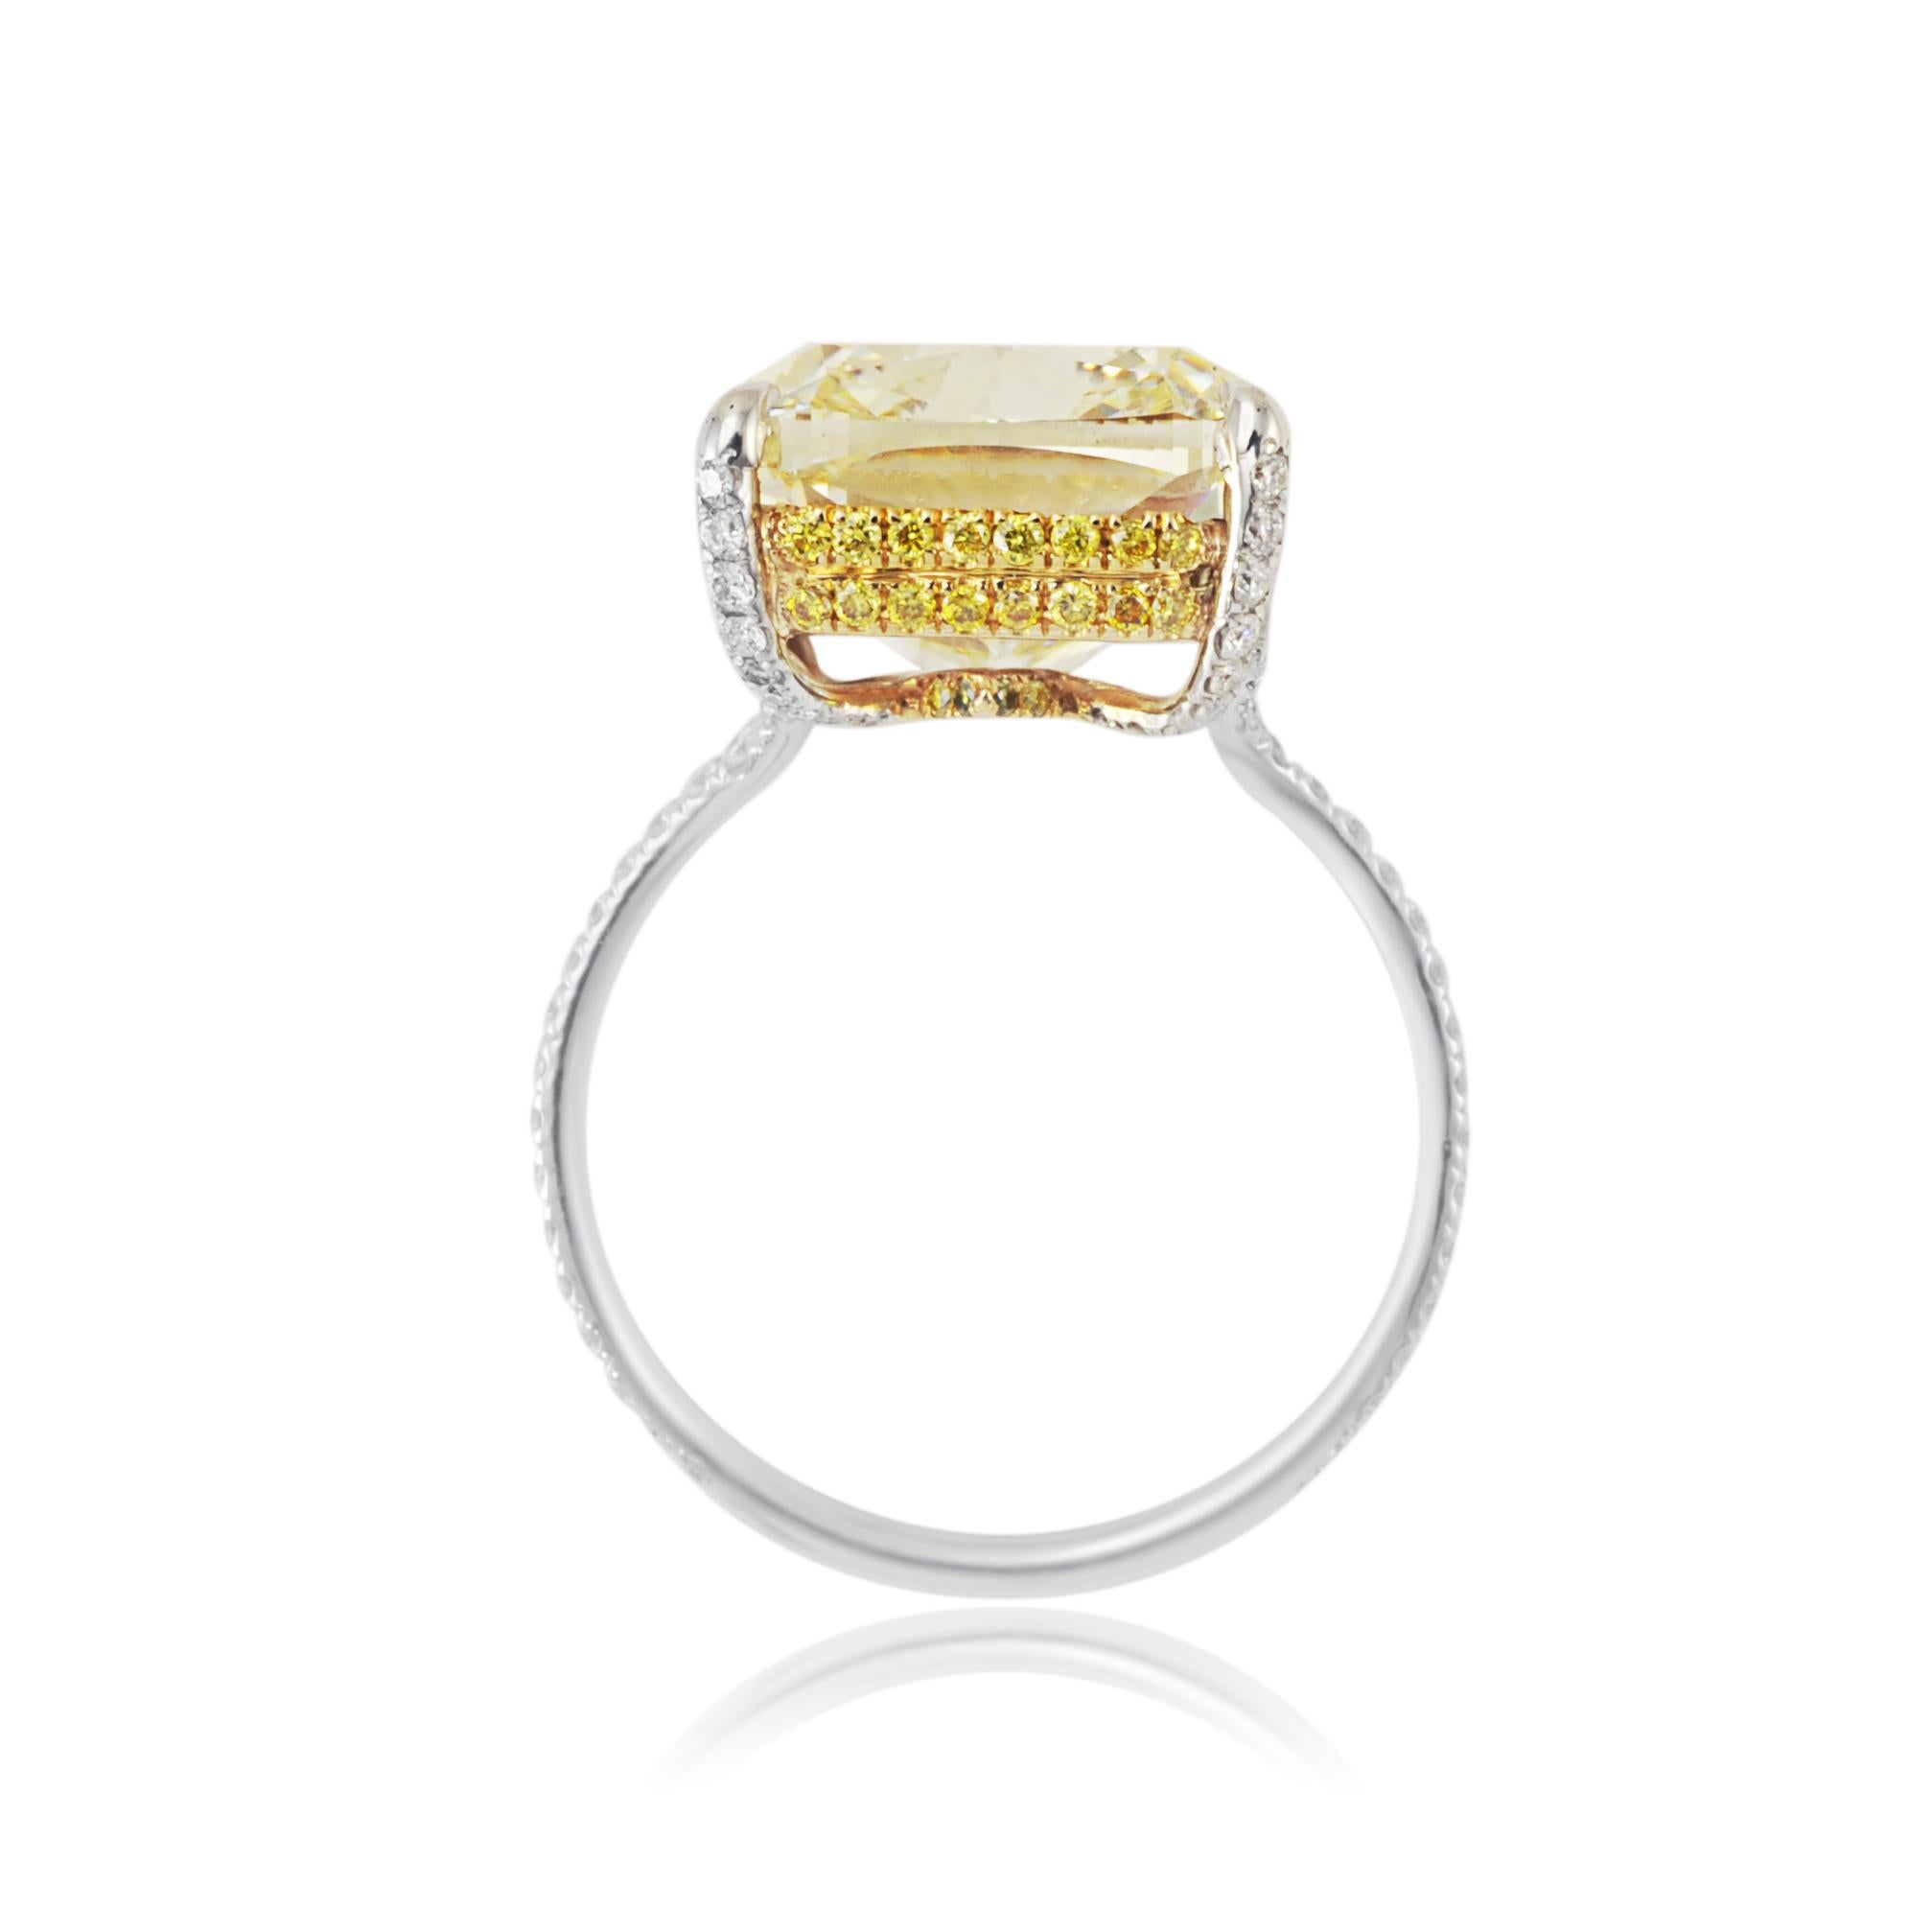 Contemporary HRD Certified 11.07 Carat Fancy Yellow Cushion Diamond Ring For Sale